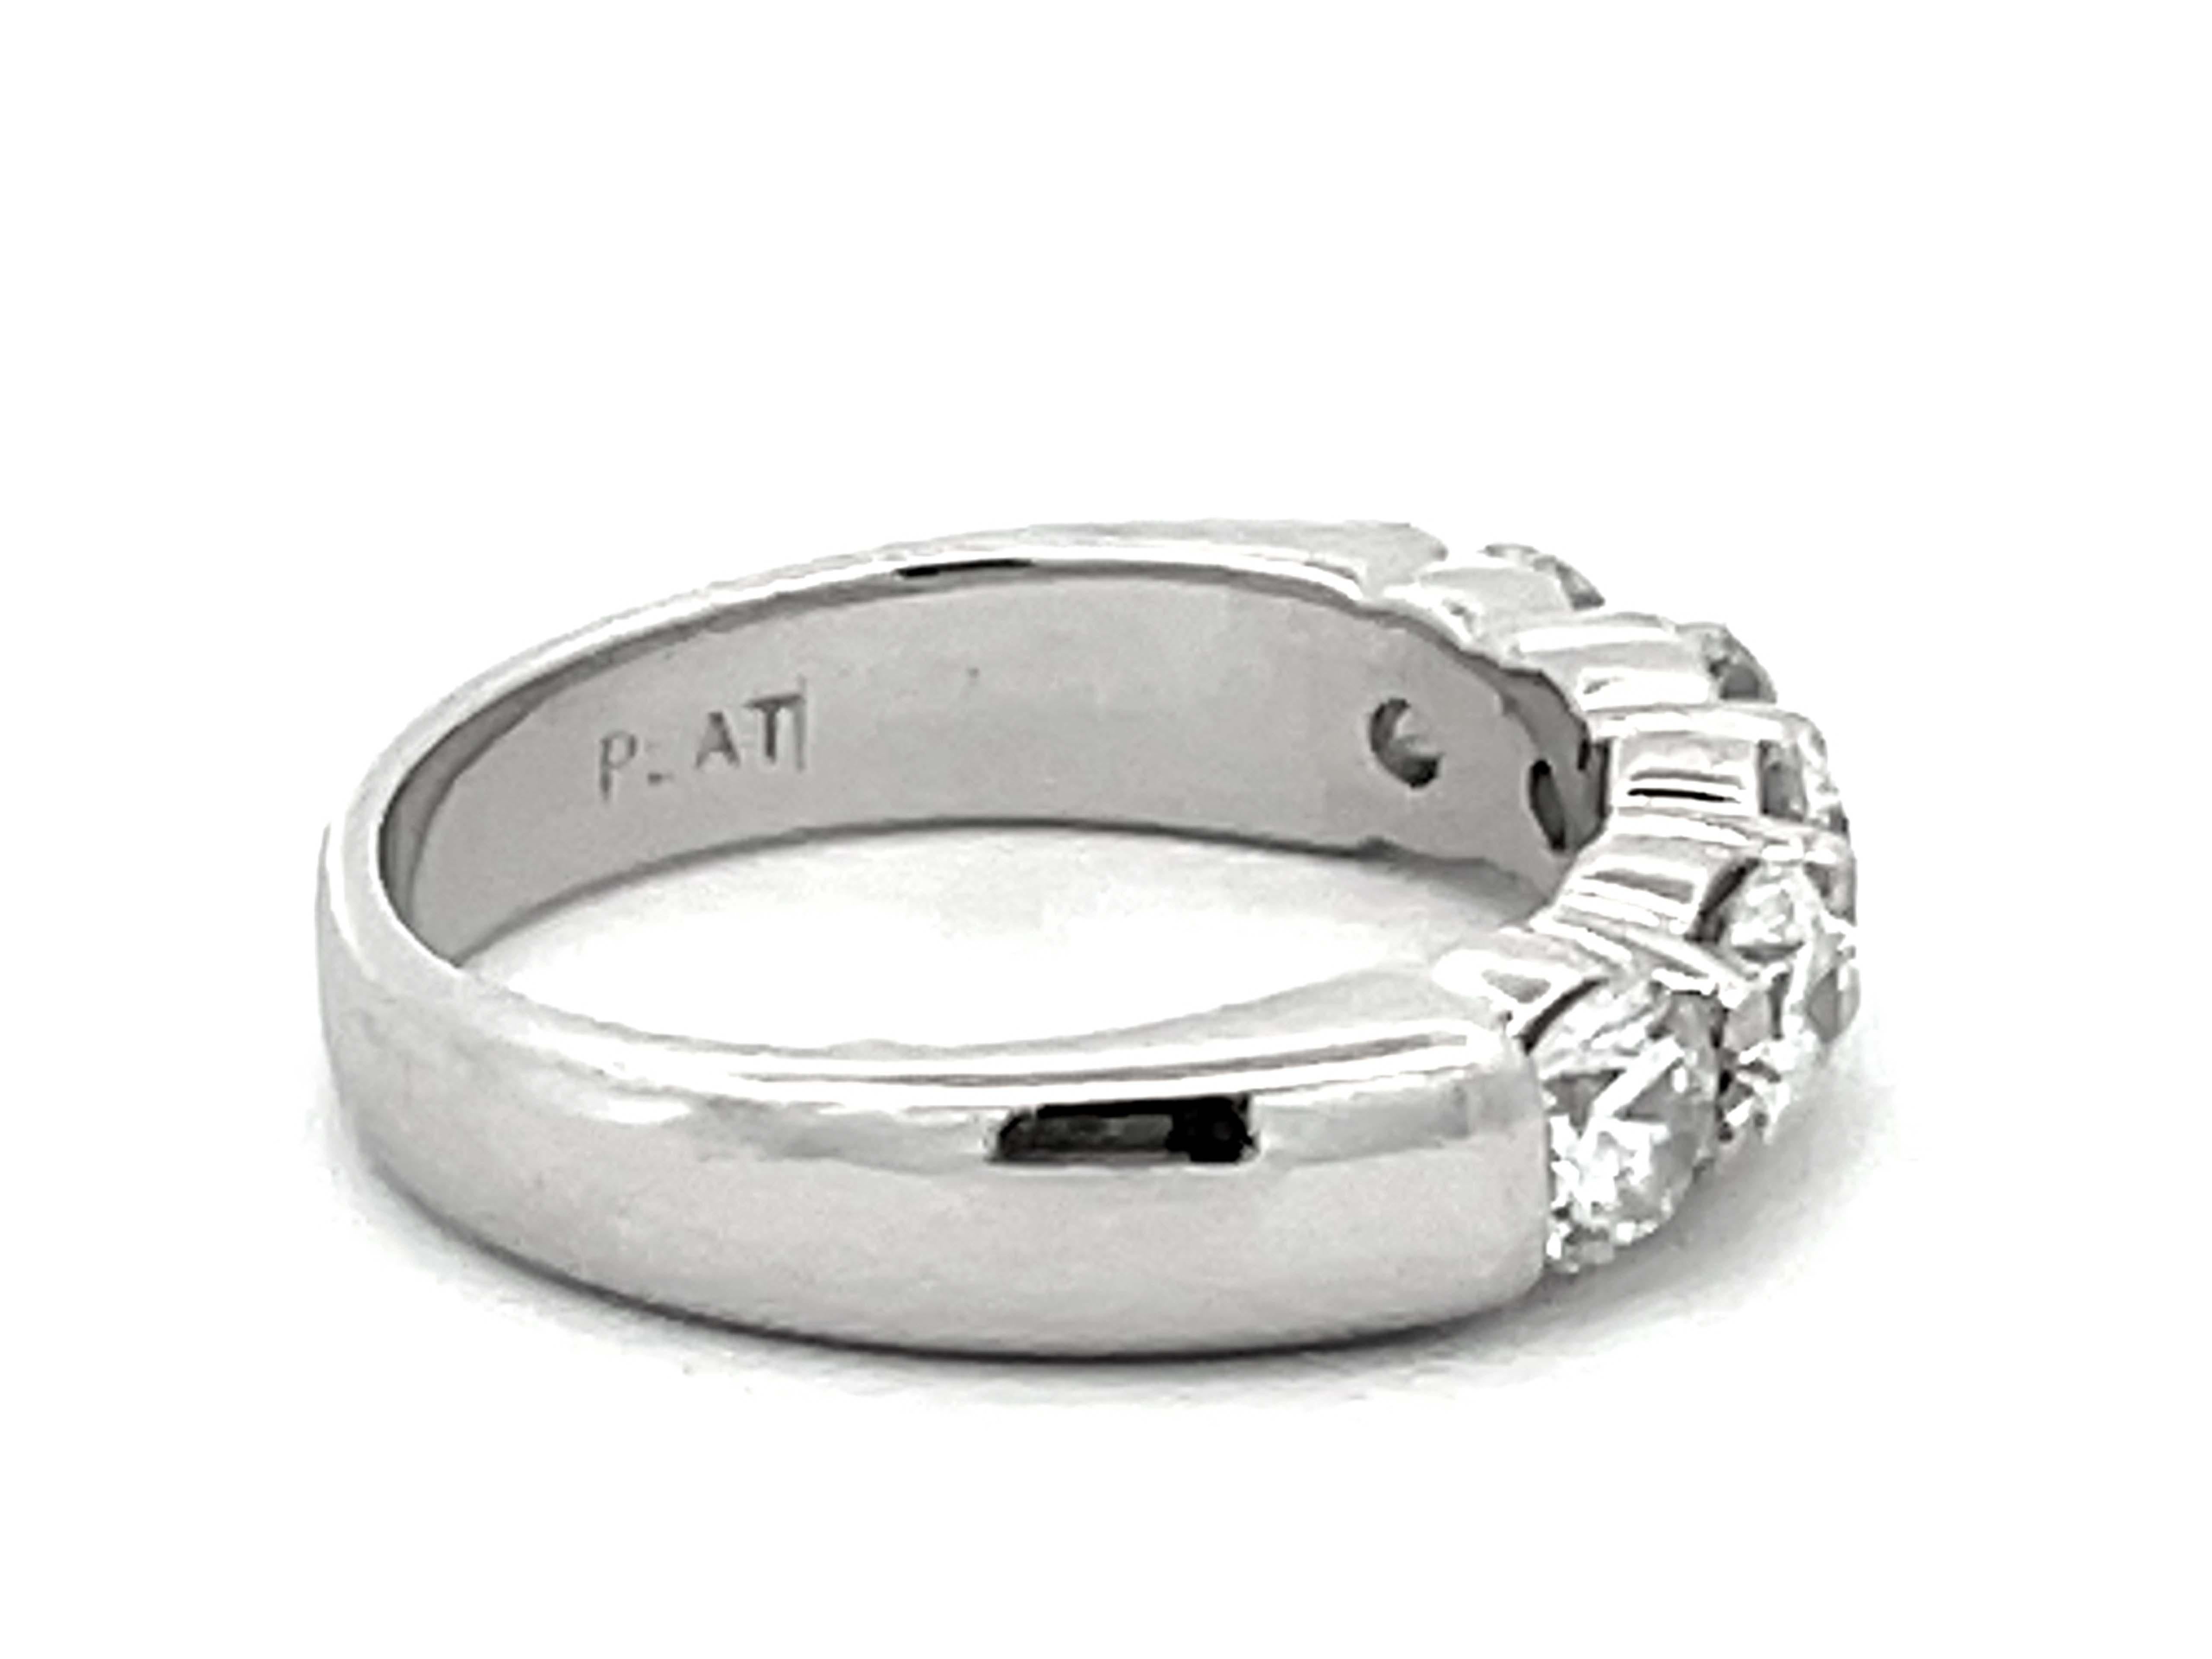 1 Carat Diamond Band Ring Platinum In Excellent Condition For Sale In Honolulu, HI